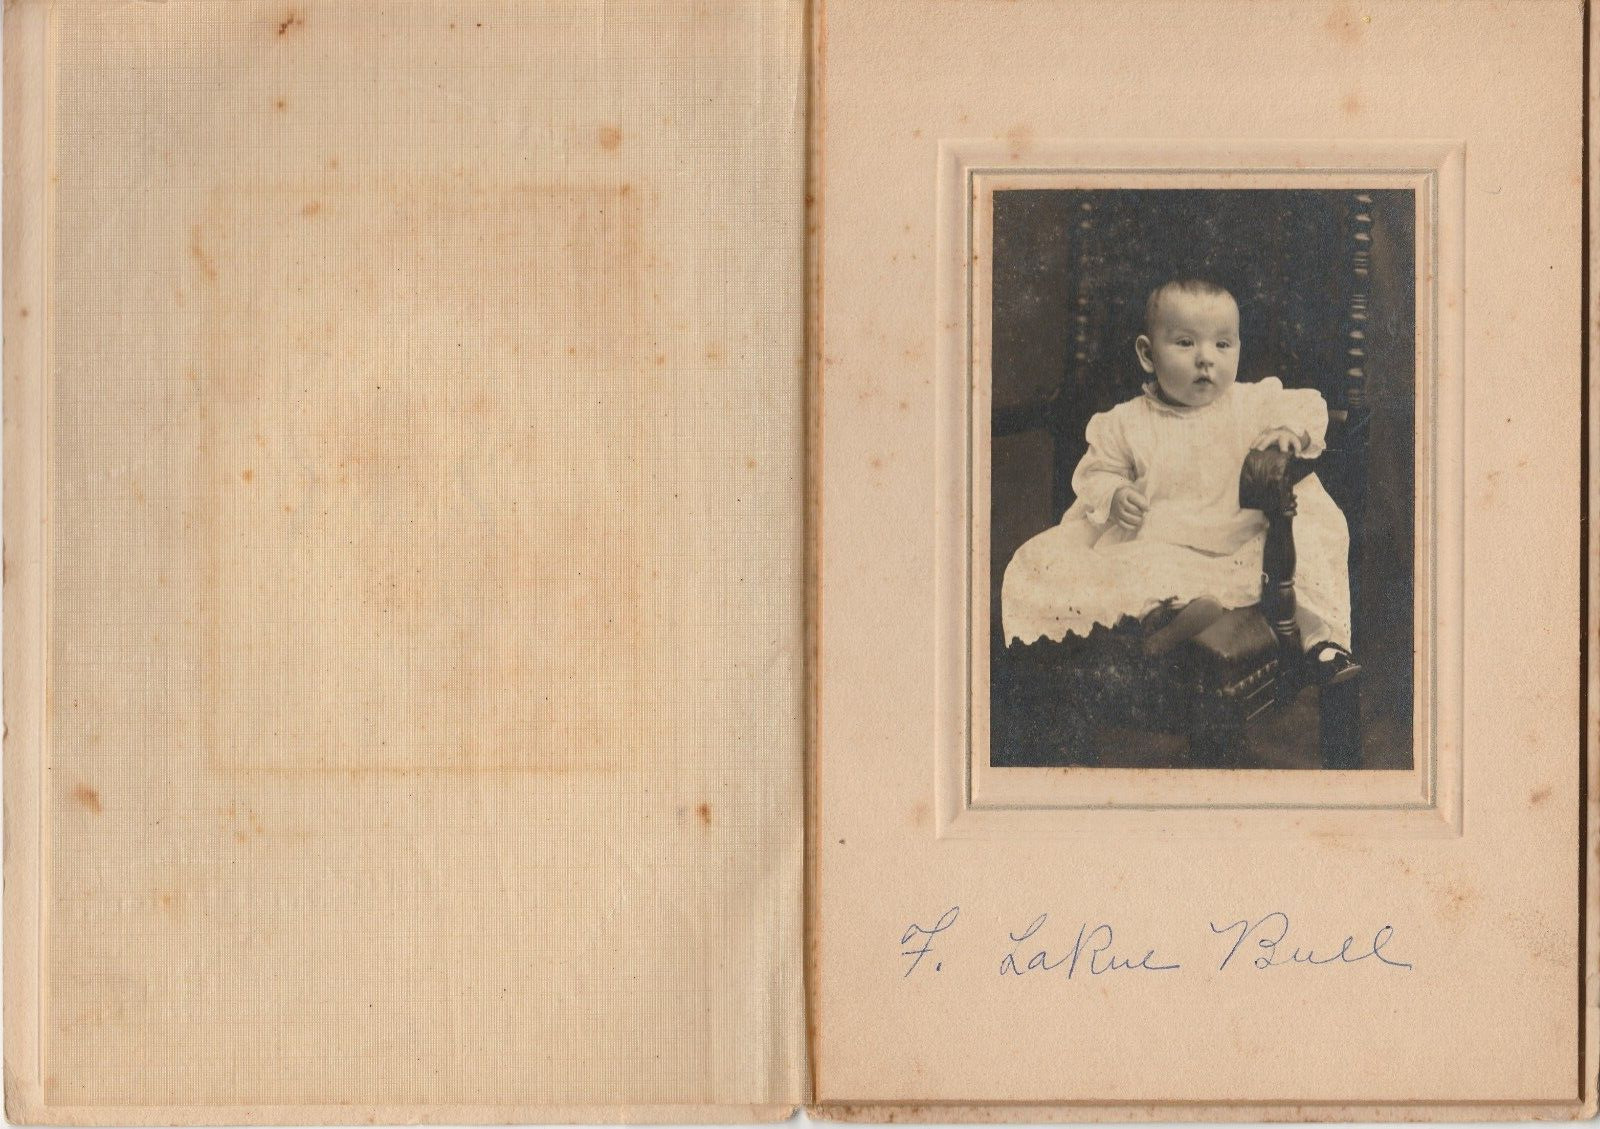 Baby Boy in Dress Photograph in cardboard frame Surname Bull F. LaRue Antique